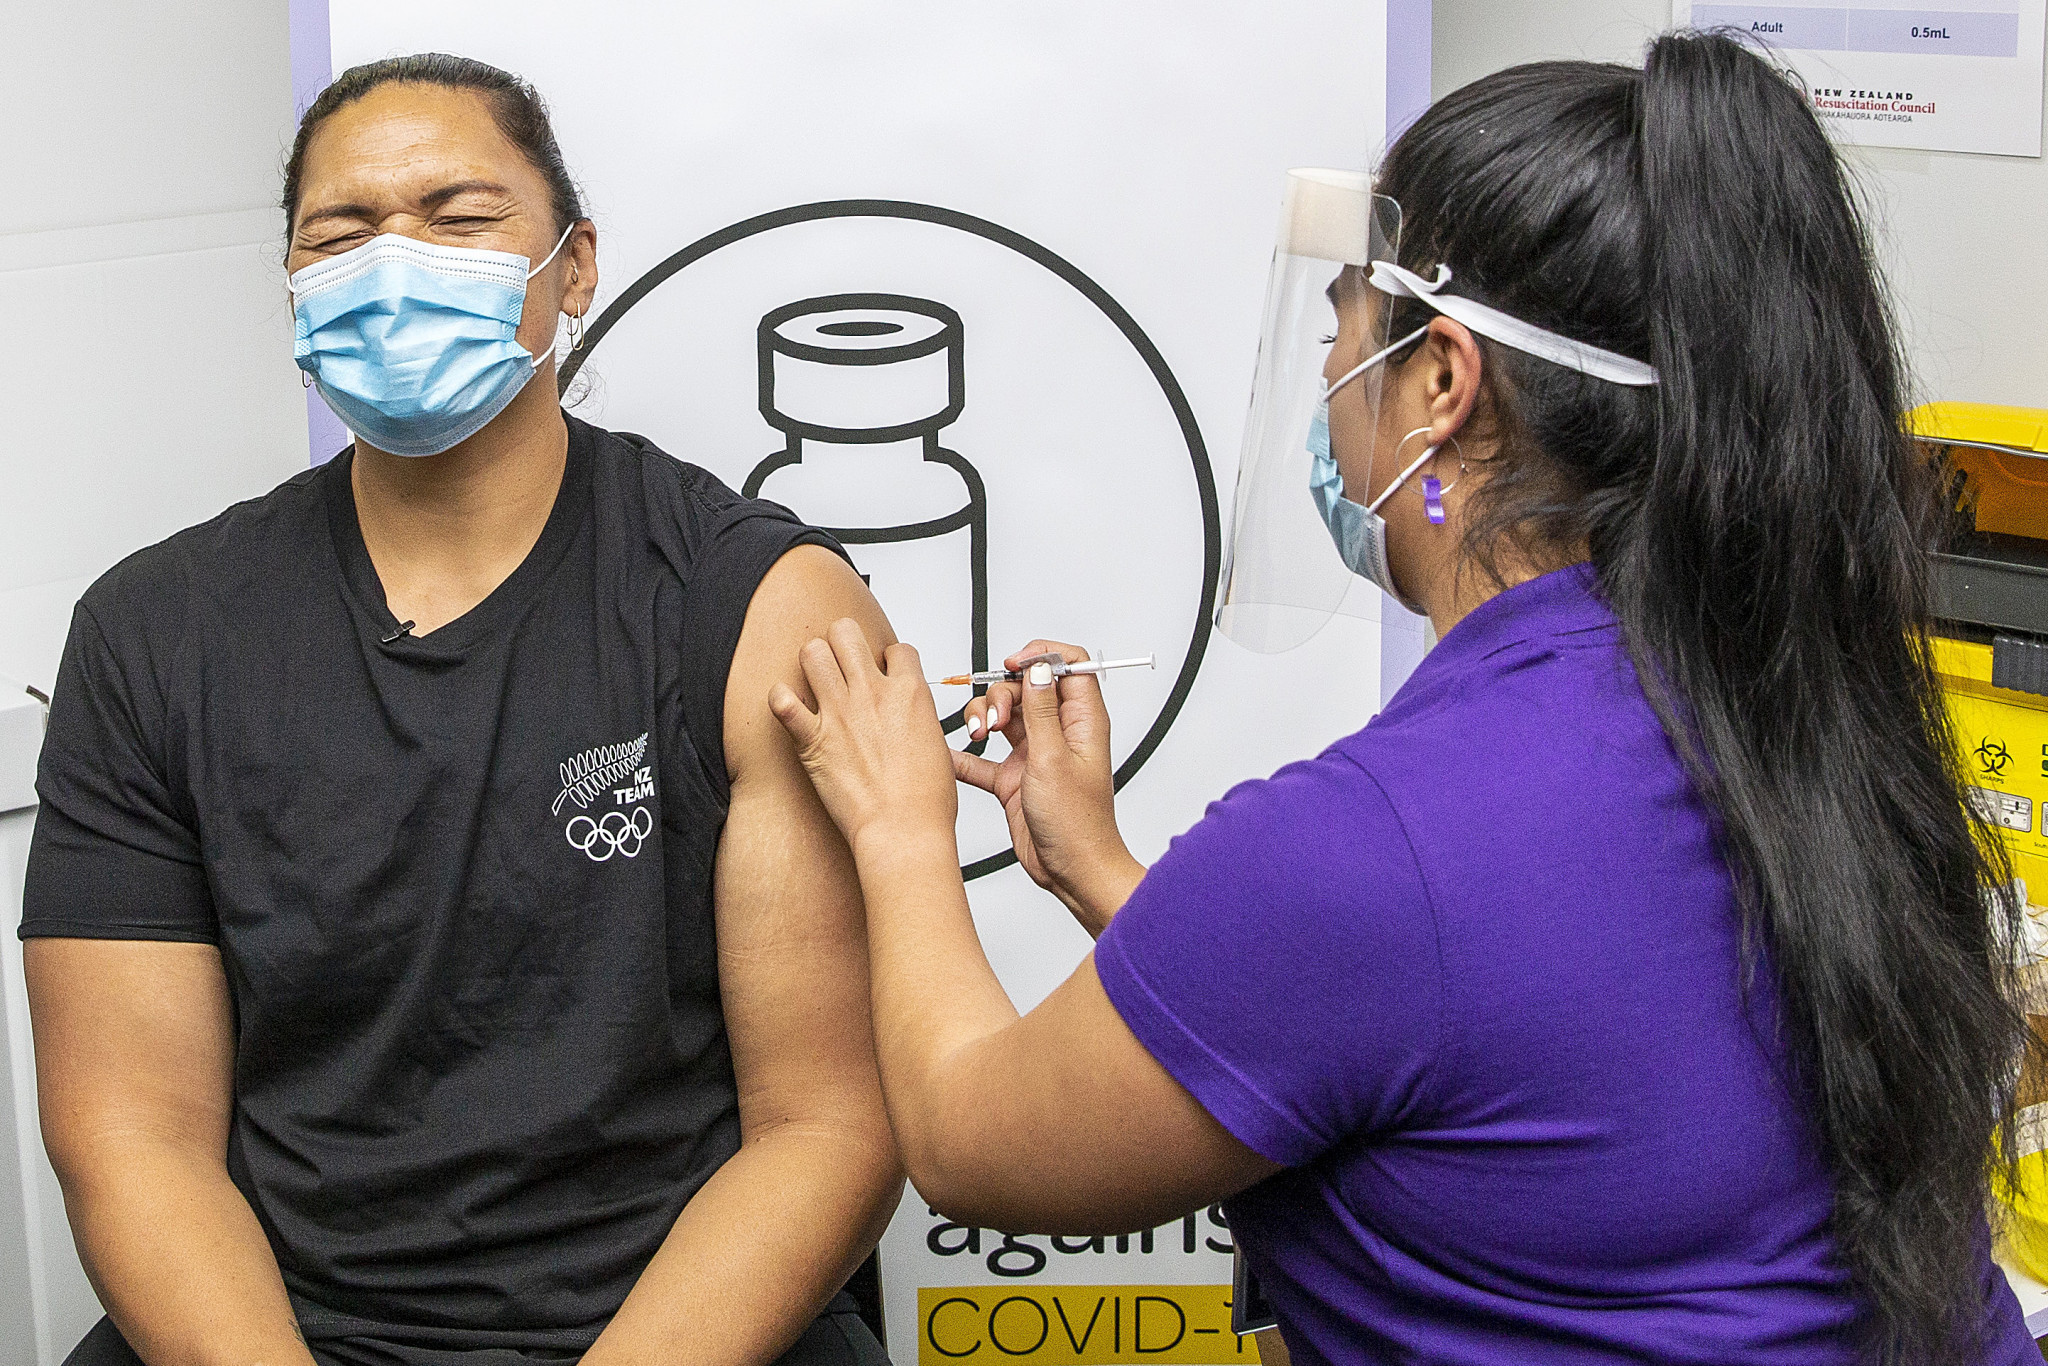 All athletes competing at Beijing 2022 will have to be vaccinated against COVID-19 to avoid spending 21 days self-isolating upon arrival in the Chinese capital ©Getty Images